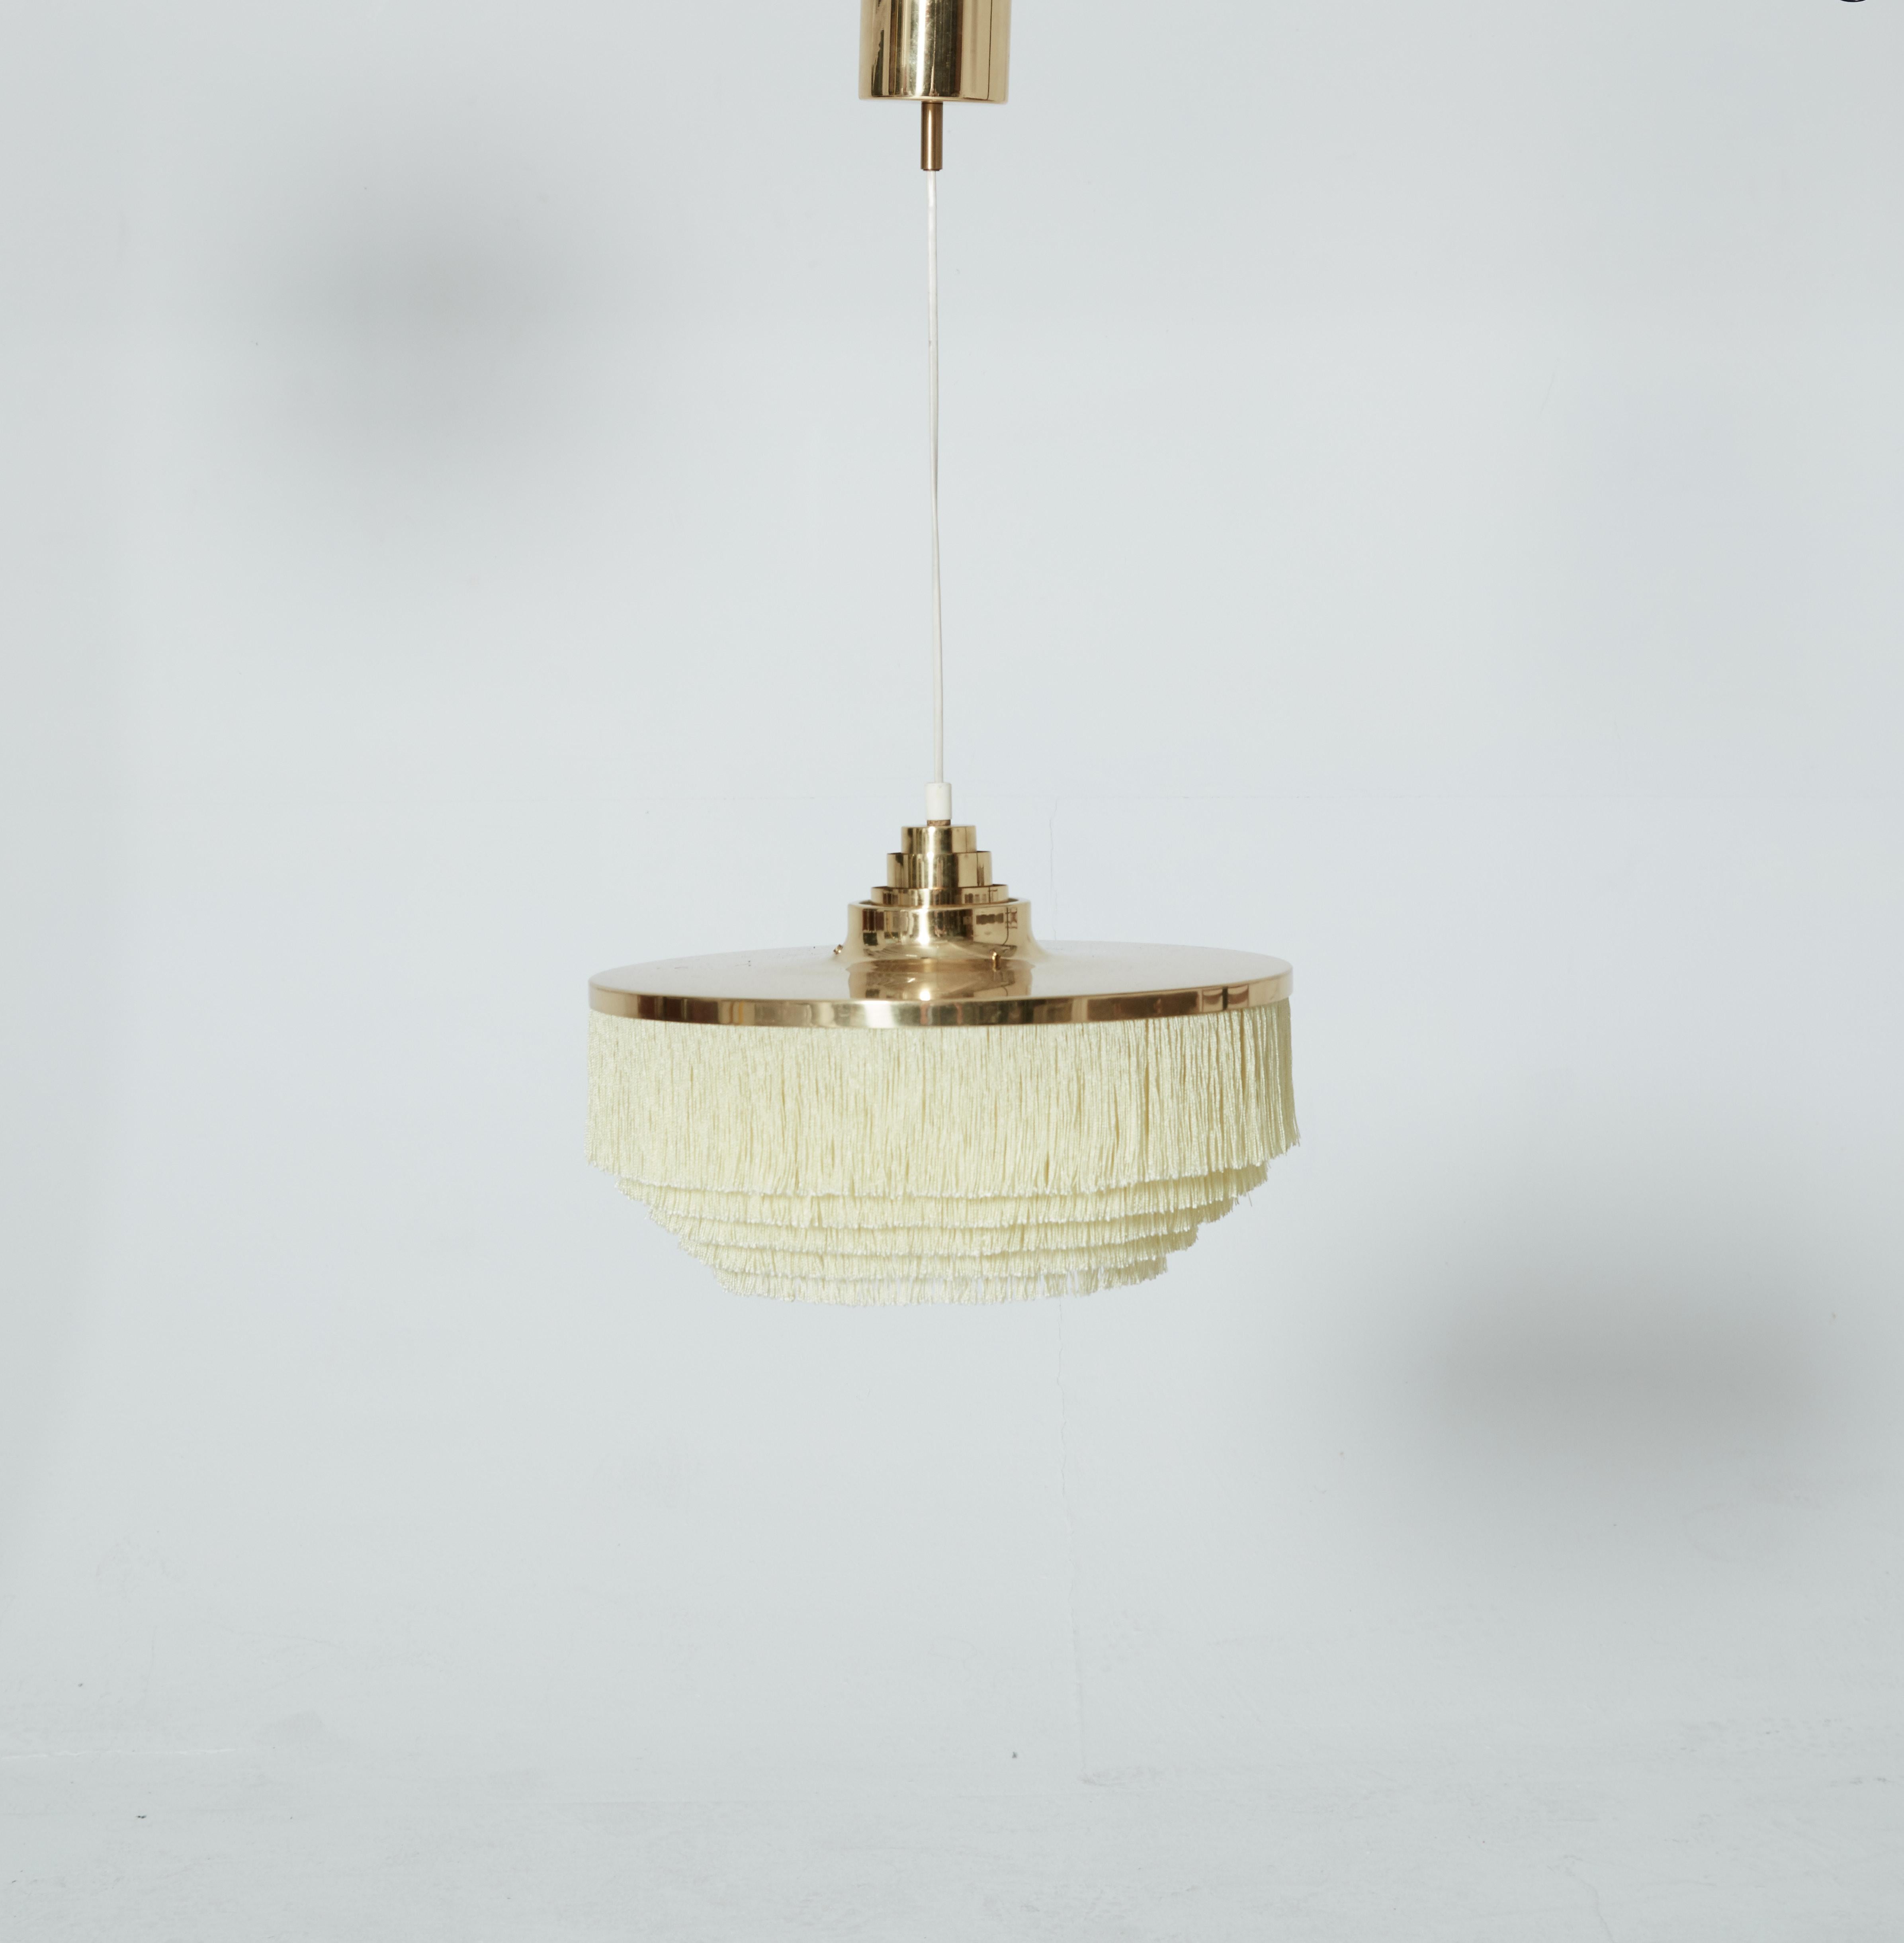 Hans Agne Jakobsson brass and silk fringed pendant lamp, Sweden, 1960s. Excellent condition. Height is adjustable.